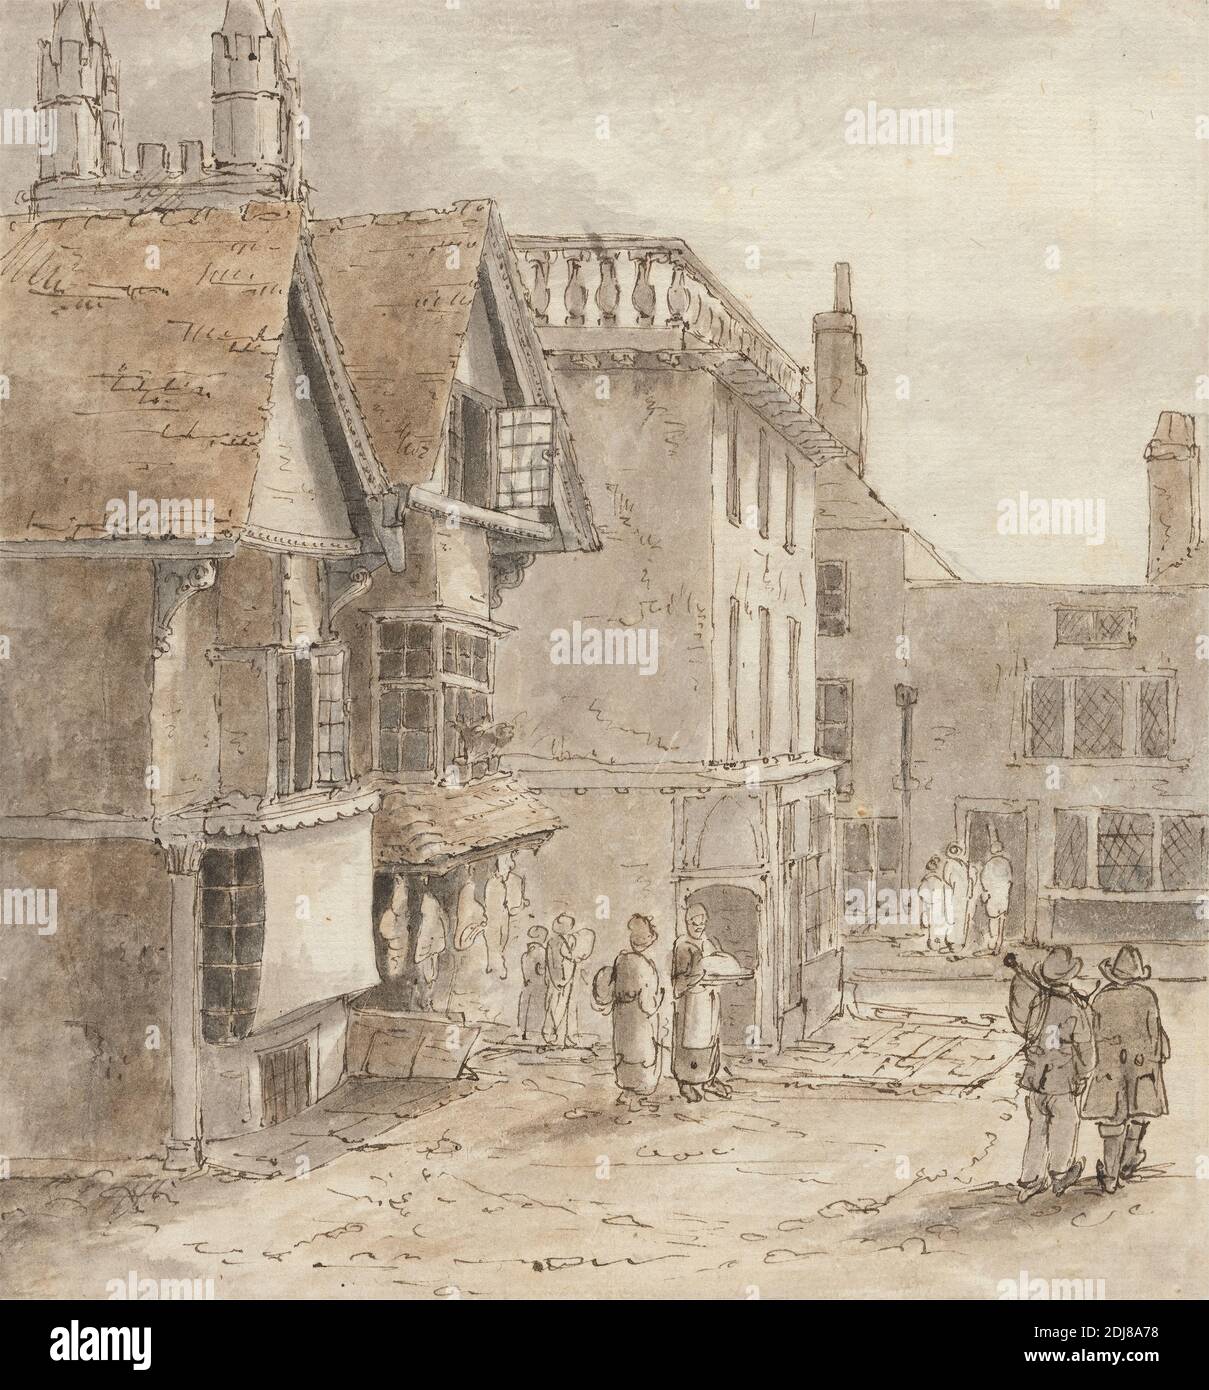 At Ashford, Attributed to Rev. Daniel Finch, 1757–1840, British, 1818, Pen, brown ink, gray ink, and graphite on medium, slightly textured, cream laid paper, Sheet: 8 1/2 × 8 inches (21.6 × 20.3 cm), architectural subject, cityscape, meat, patrons, shops, street, town, windows, Ashford, England, Europe, Kent, United Kingdom Stock Photo